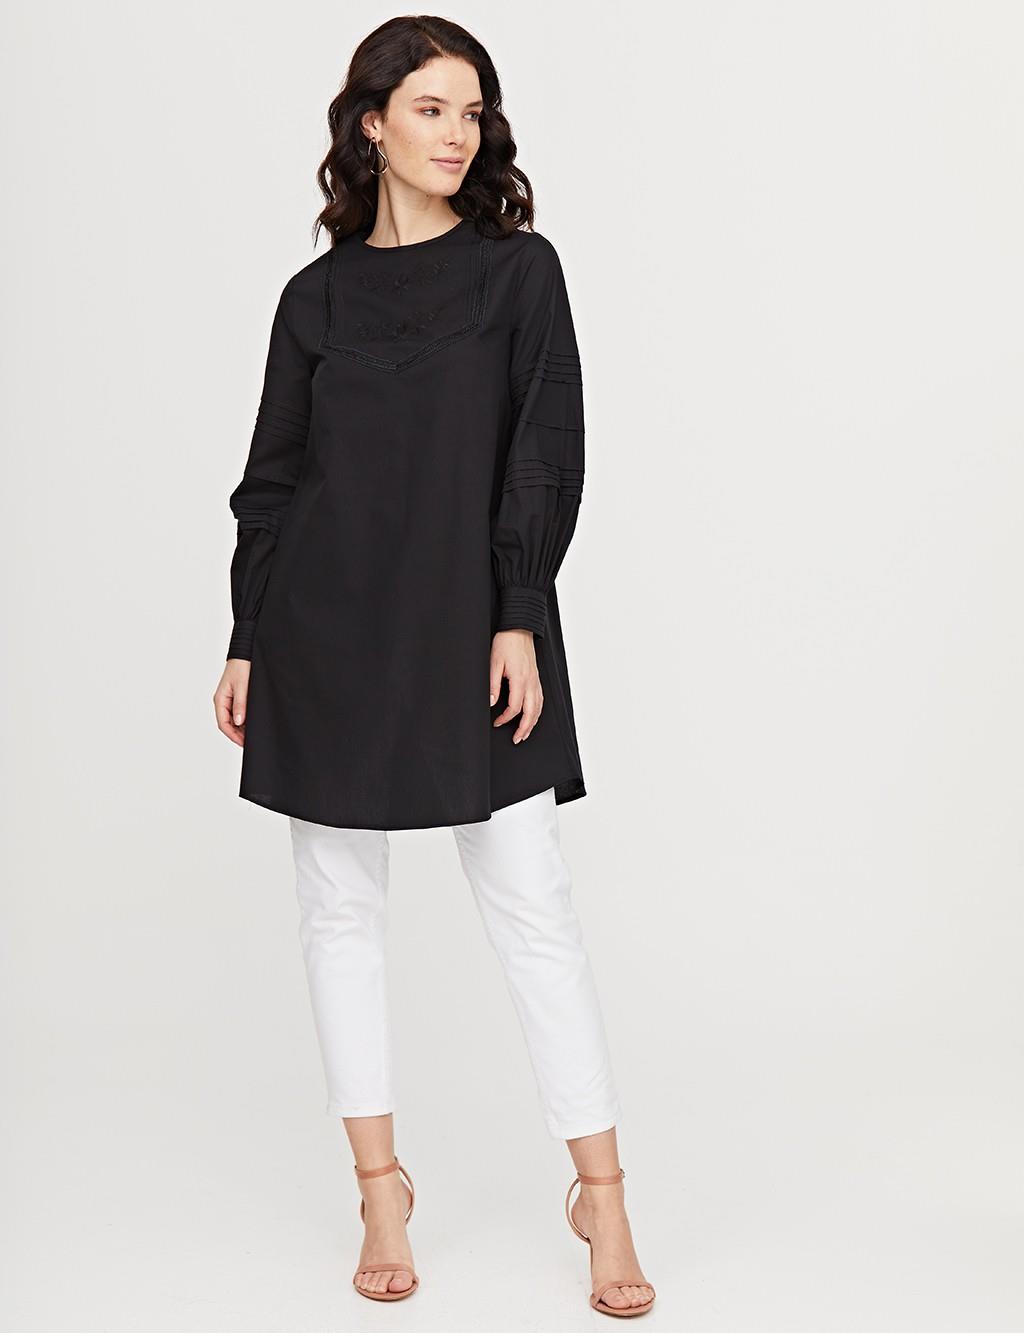 Embroidered Ribbed Tunic B21 21269 Black